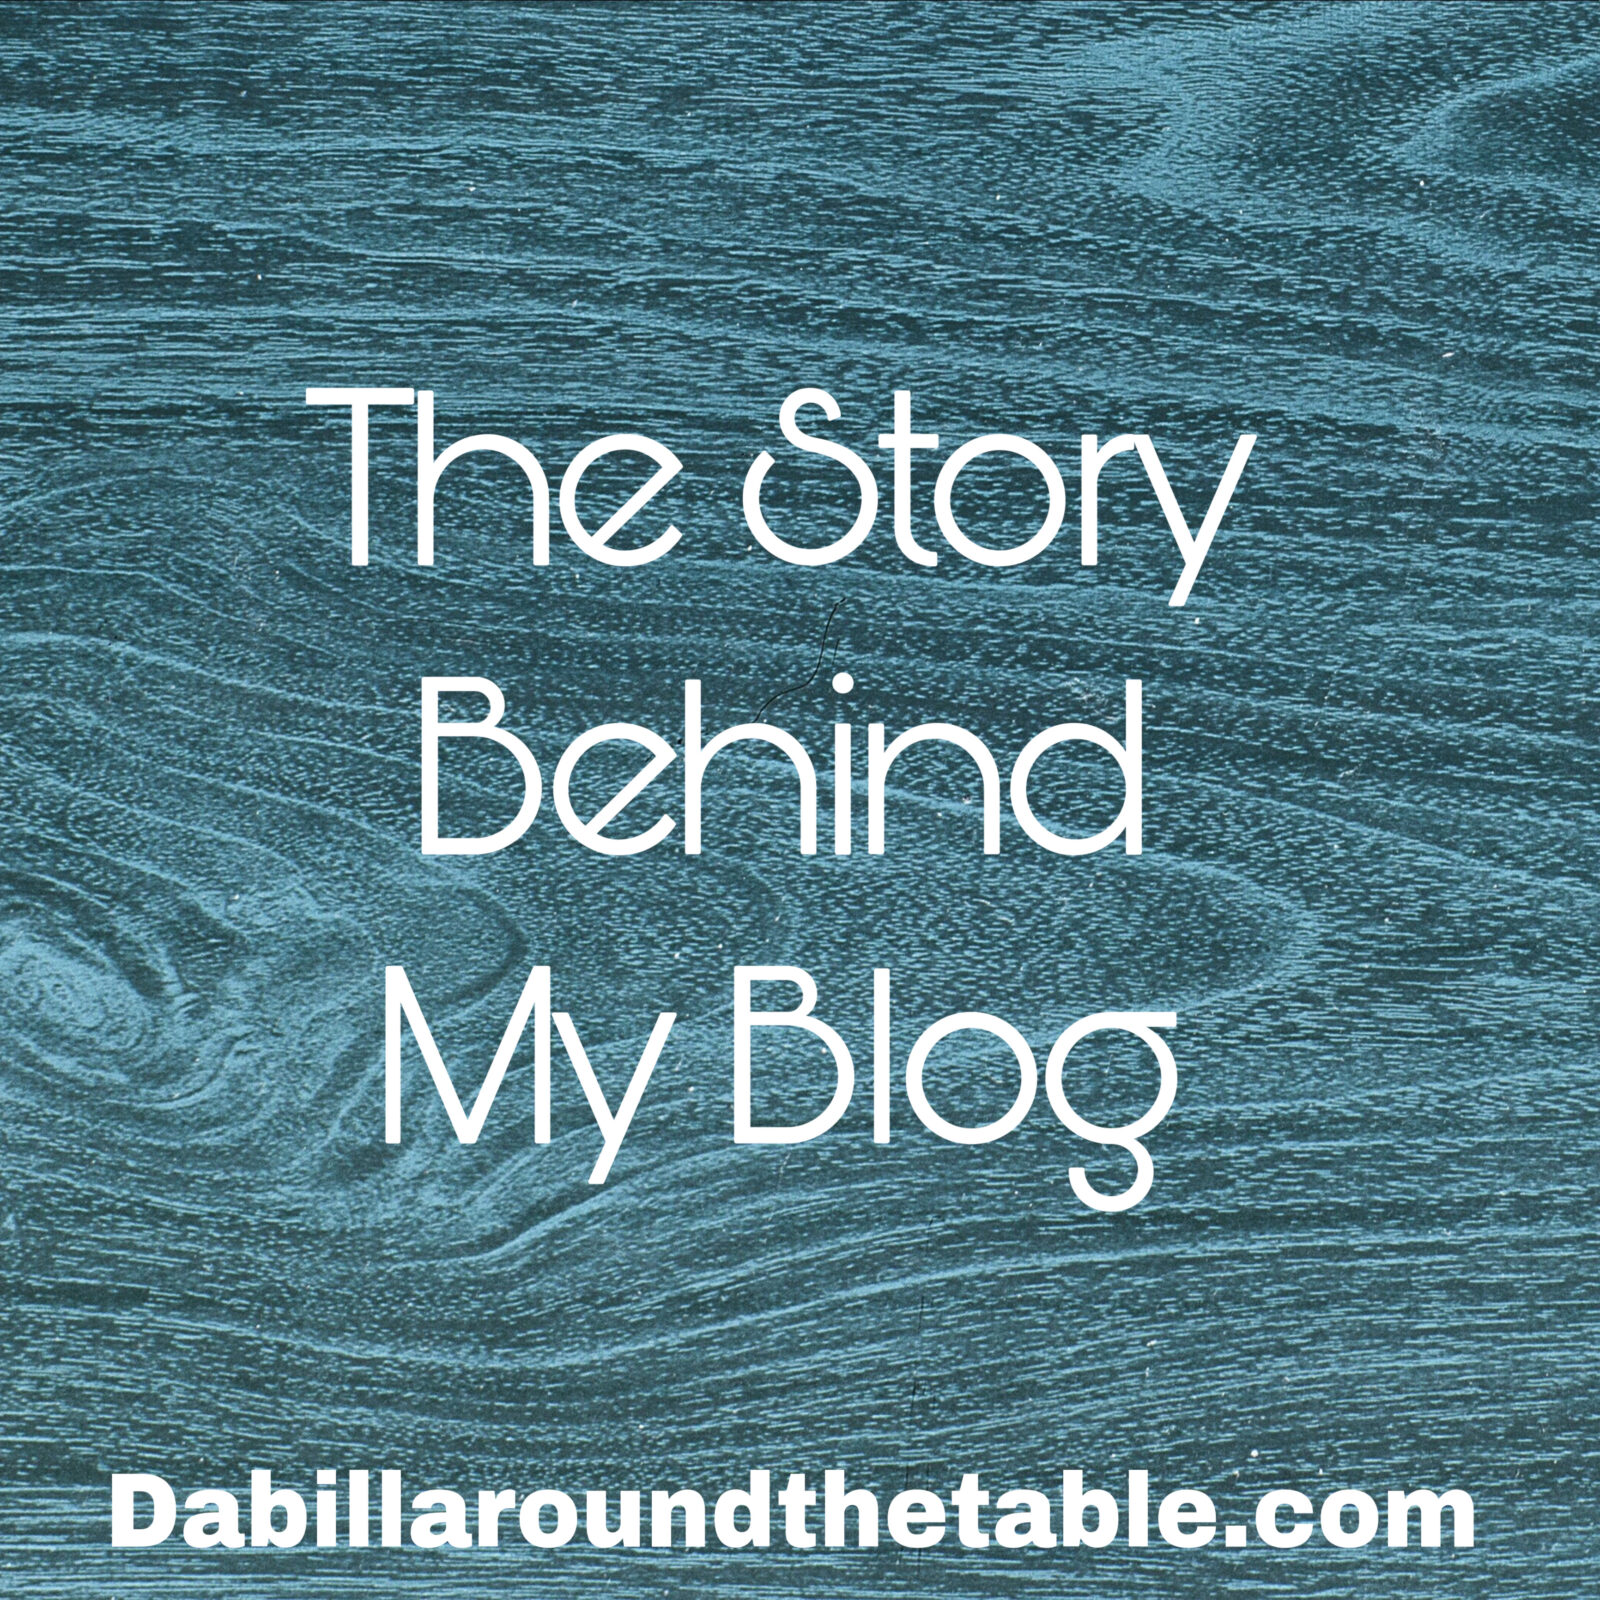 The Story Behind My Blog